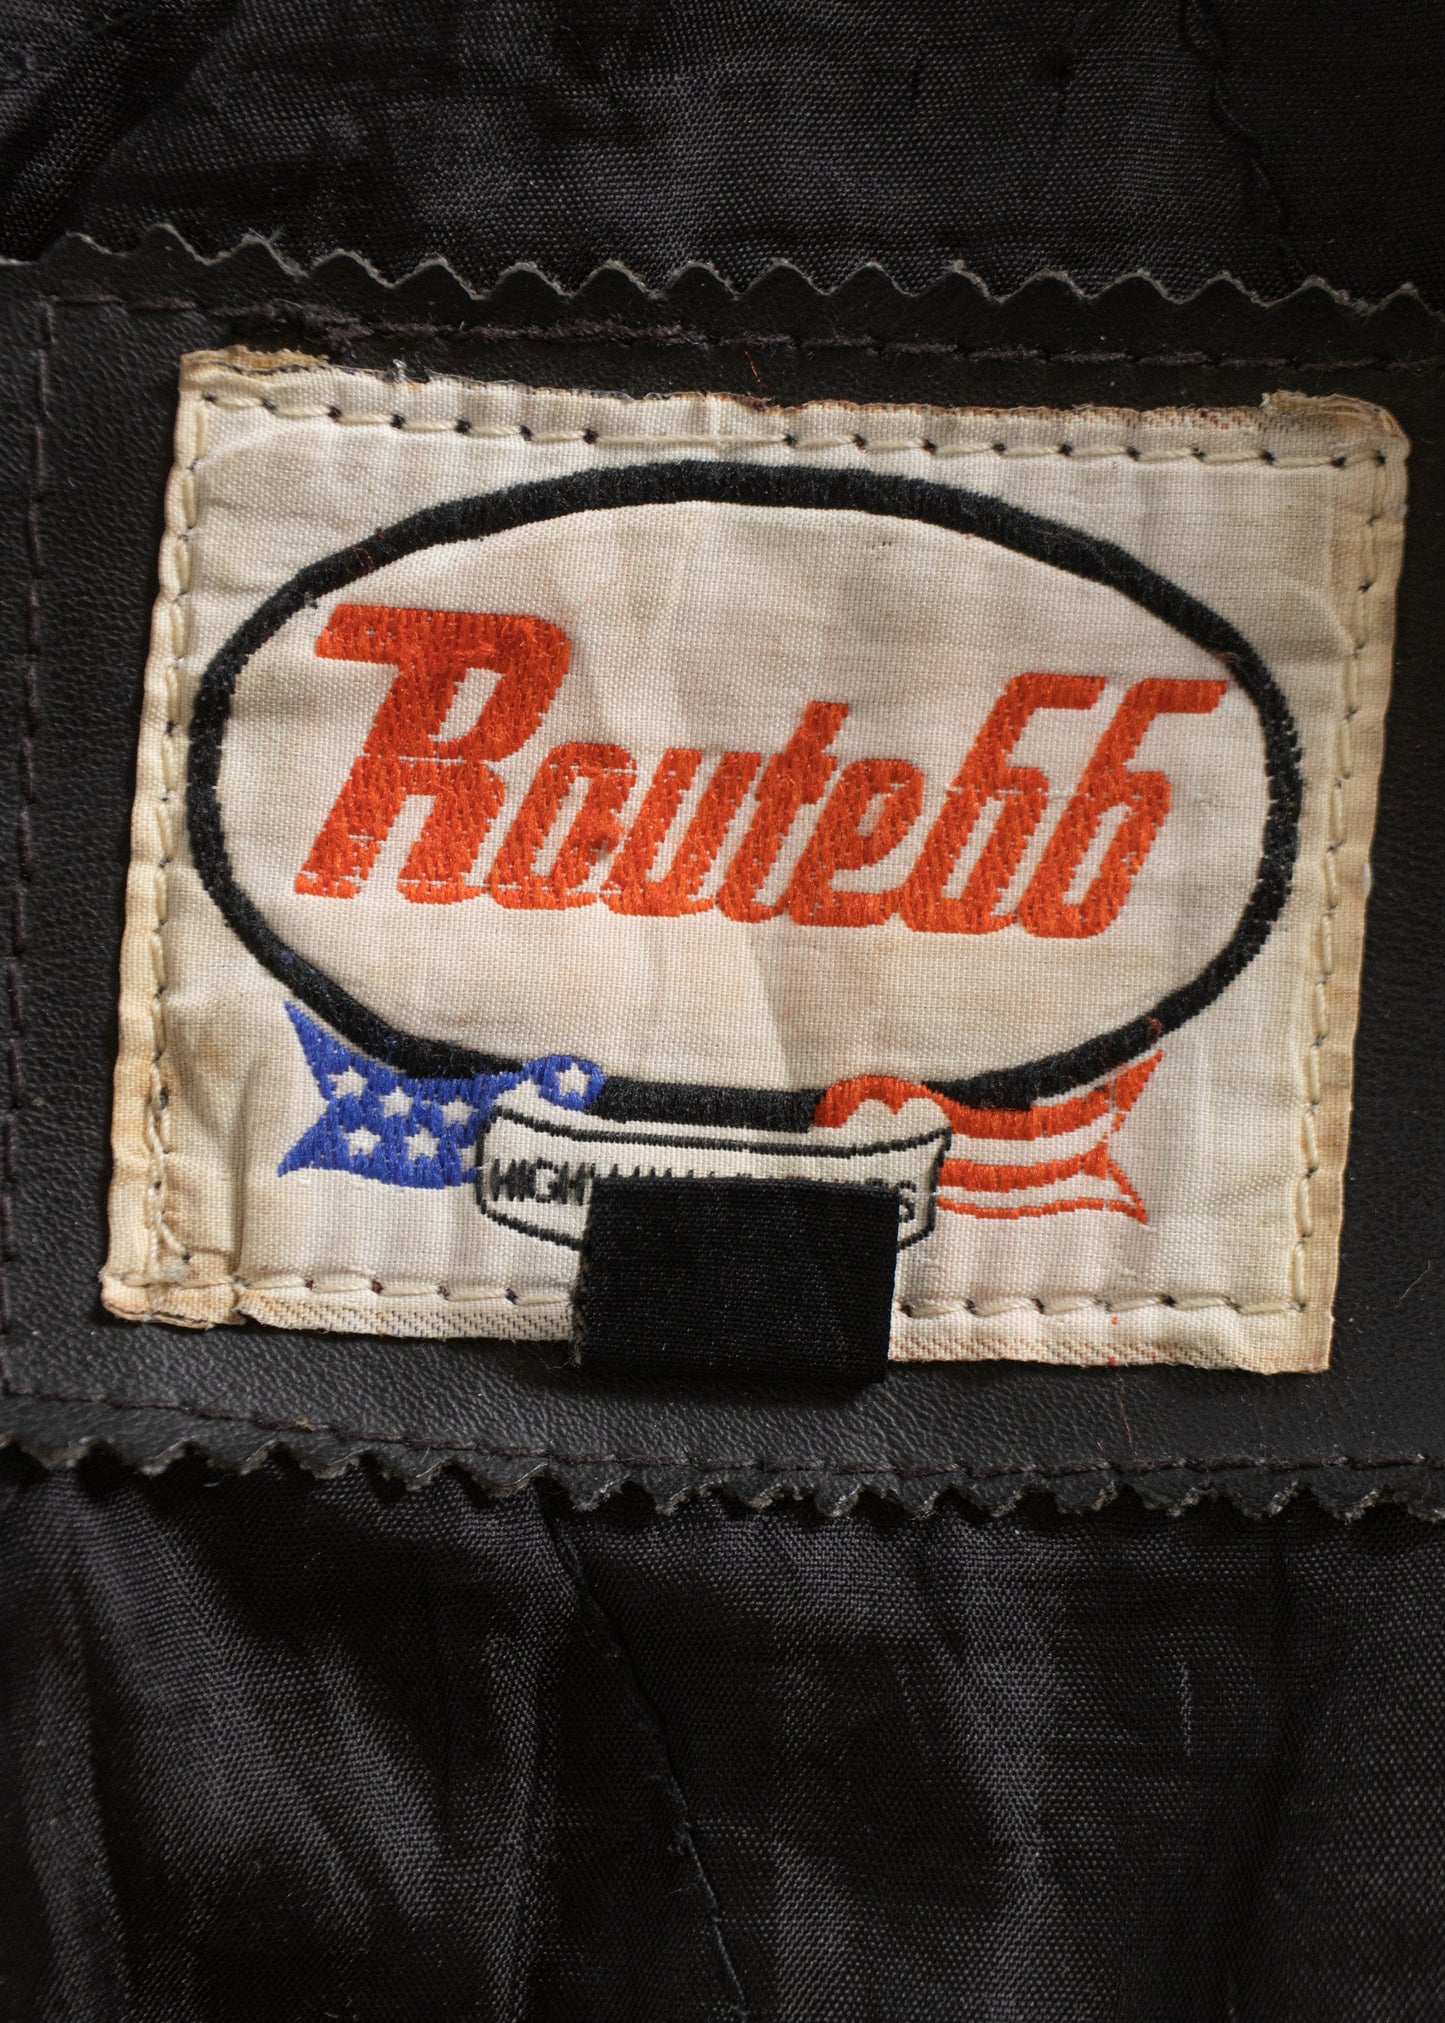 1990s Route 66 Motorcycle Leather Jacket Size L/XL